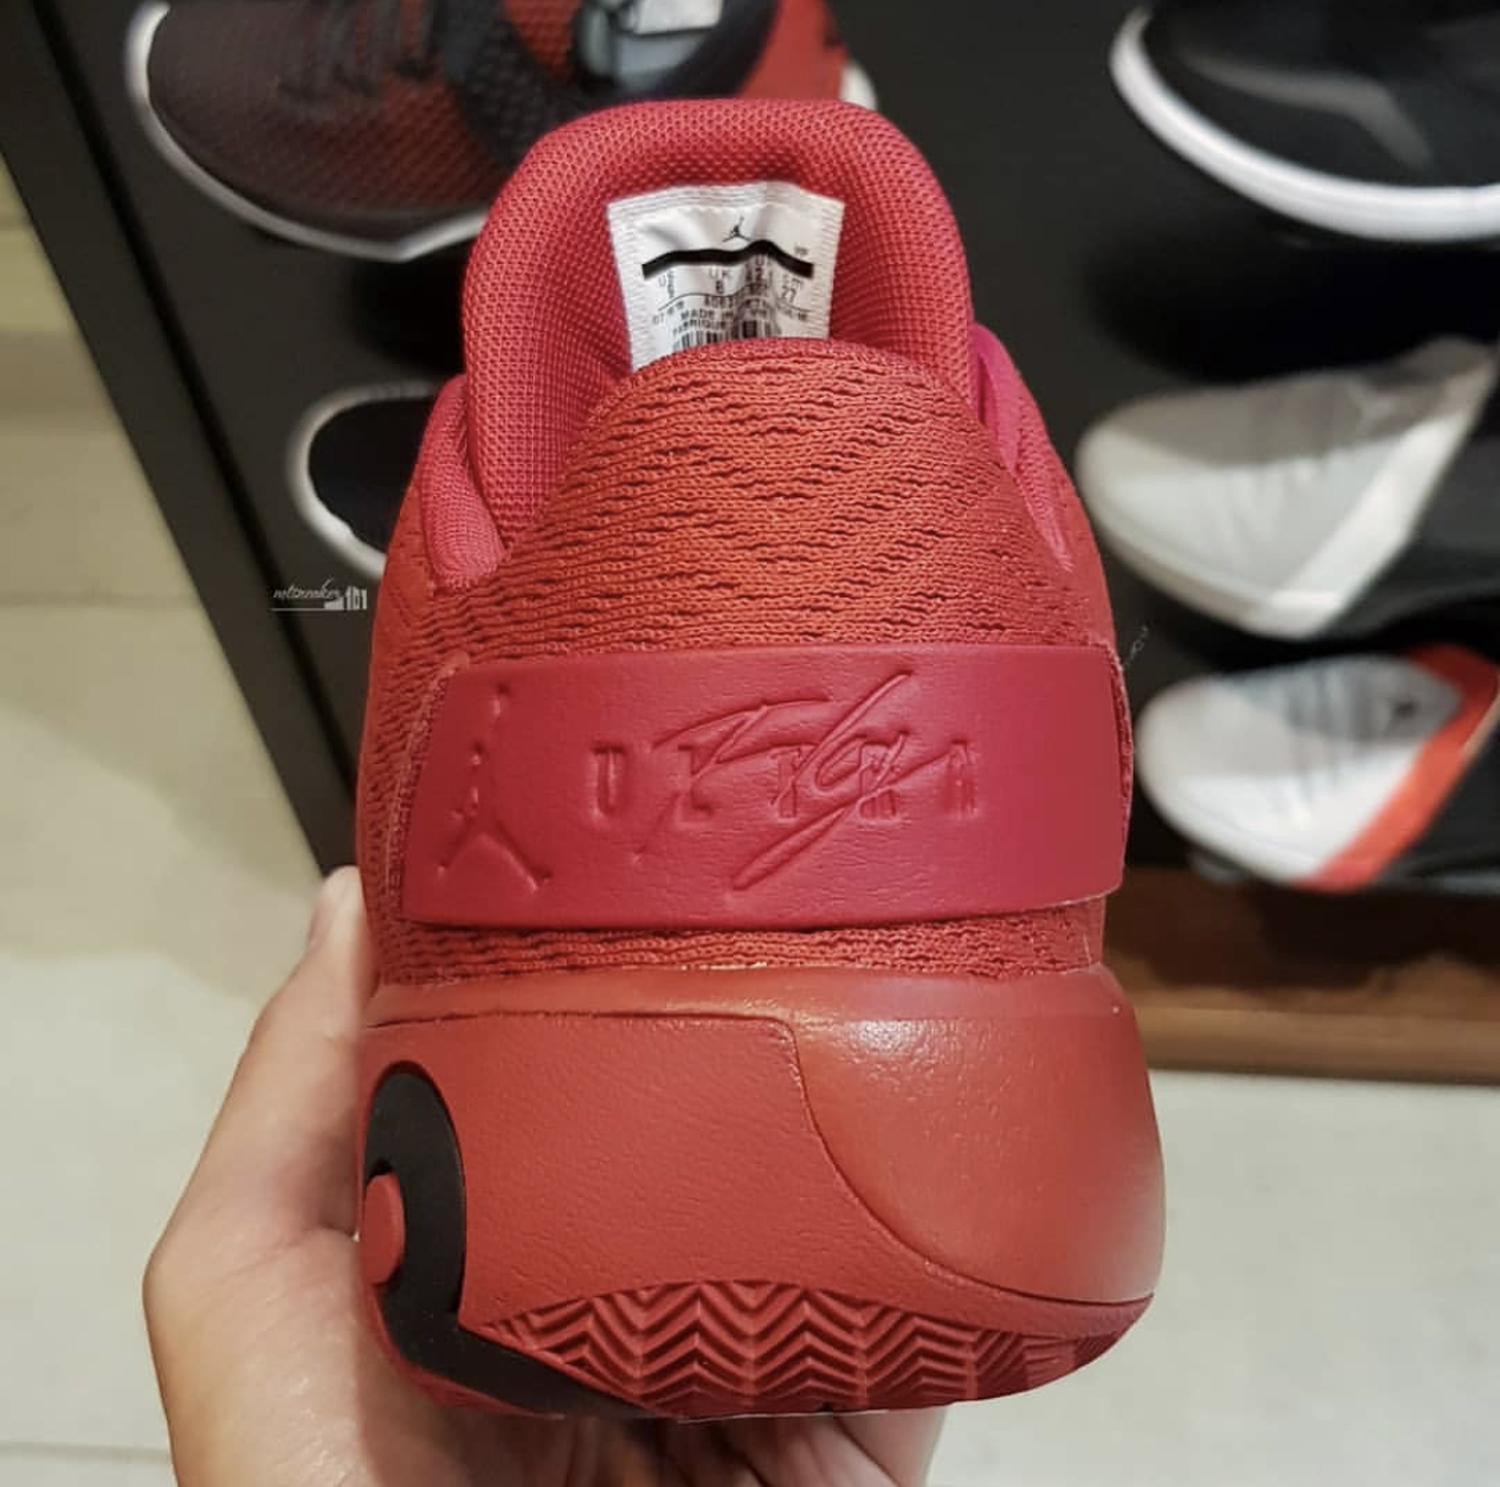 There is a Low Top Jordan Ultra Fly 3 - WearTesters